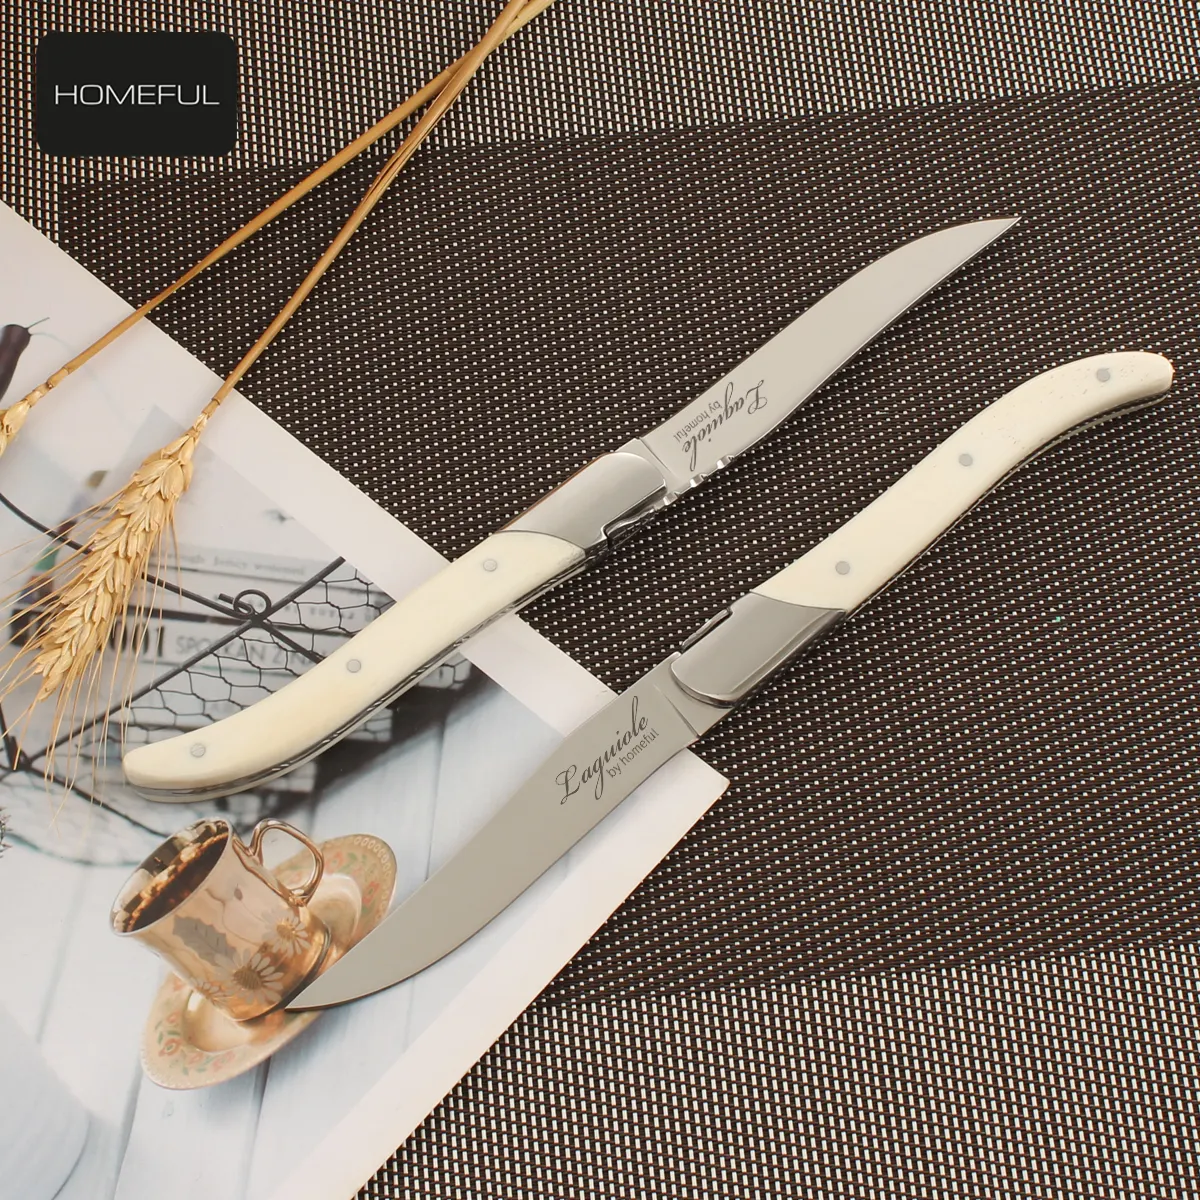 New collection stainless steel 4.5 inch sharp edge steak meat knife with bone material forged handle